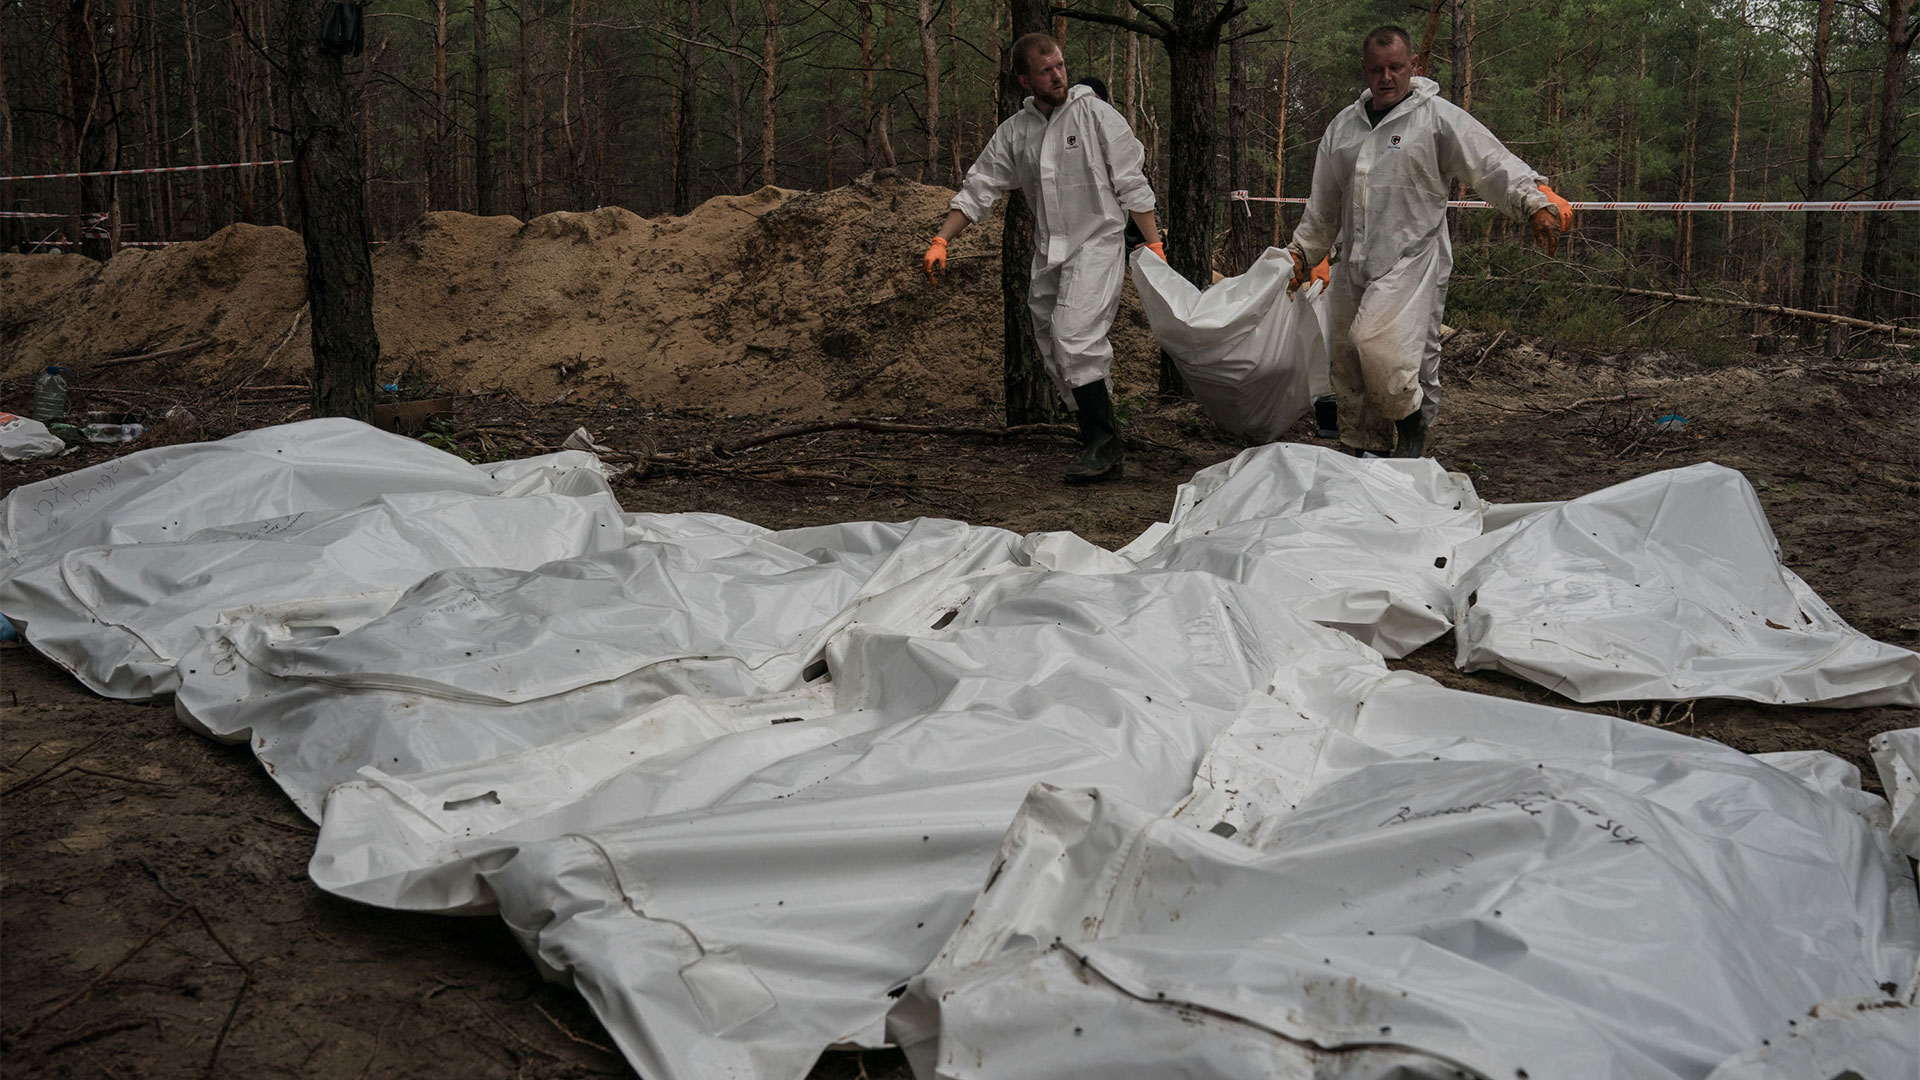 Bags containing the bodies of Ukrainian soldiers are laid out in Izyum. MUST CREDIT: Photo for The Washington Post by Wojciech Grzedzinski.